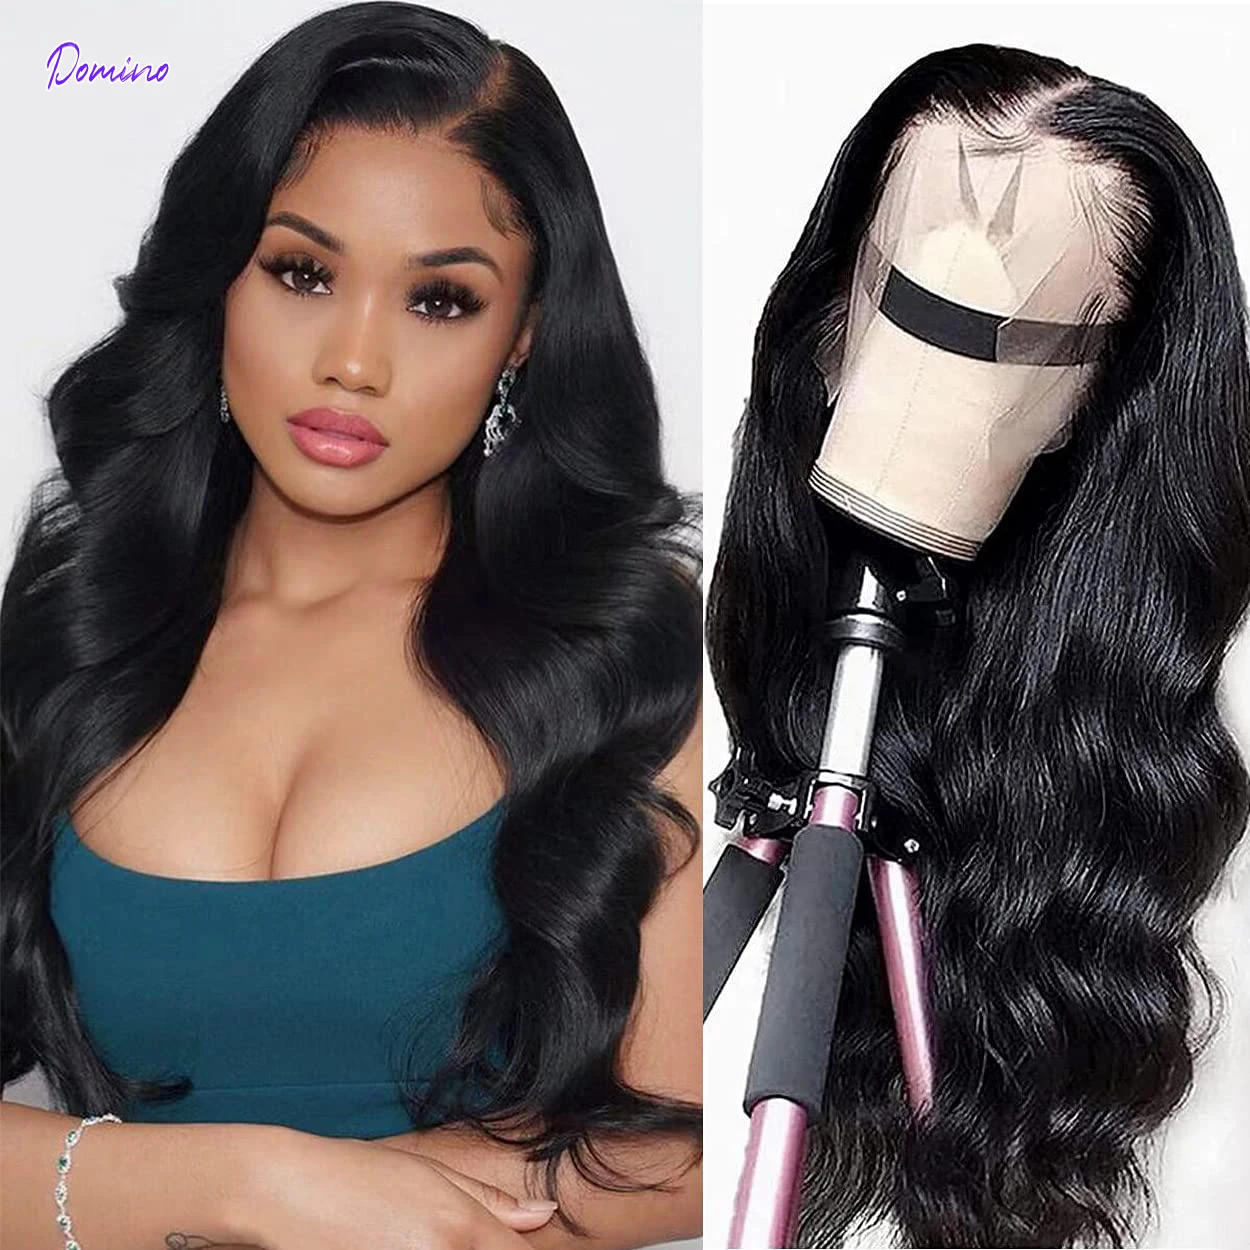 DOMINO Lace Front Human Hair Wigs Body Wave Lace Closure Wig  Lace Wig  Lace Front Wig Brazilian With Natural Hair